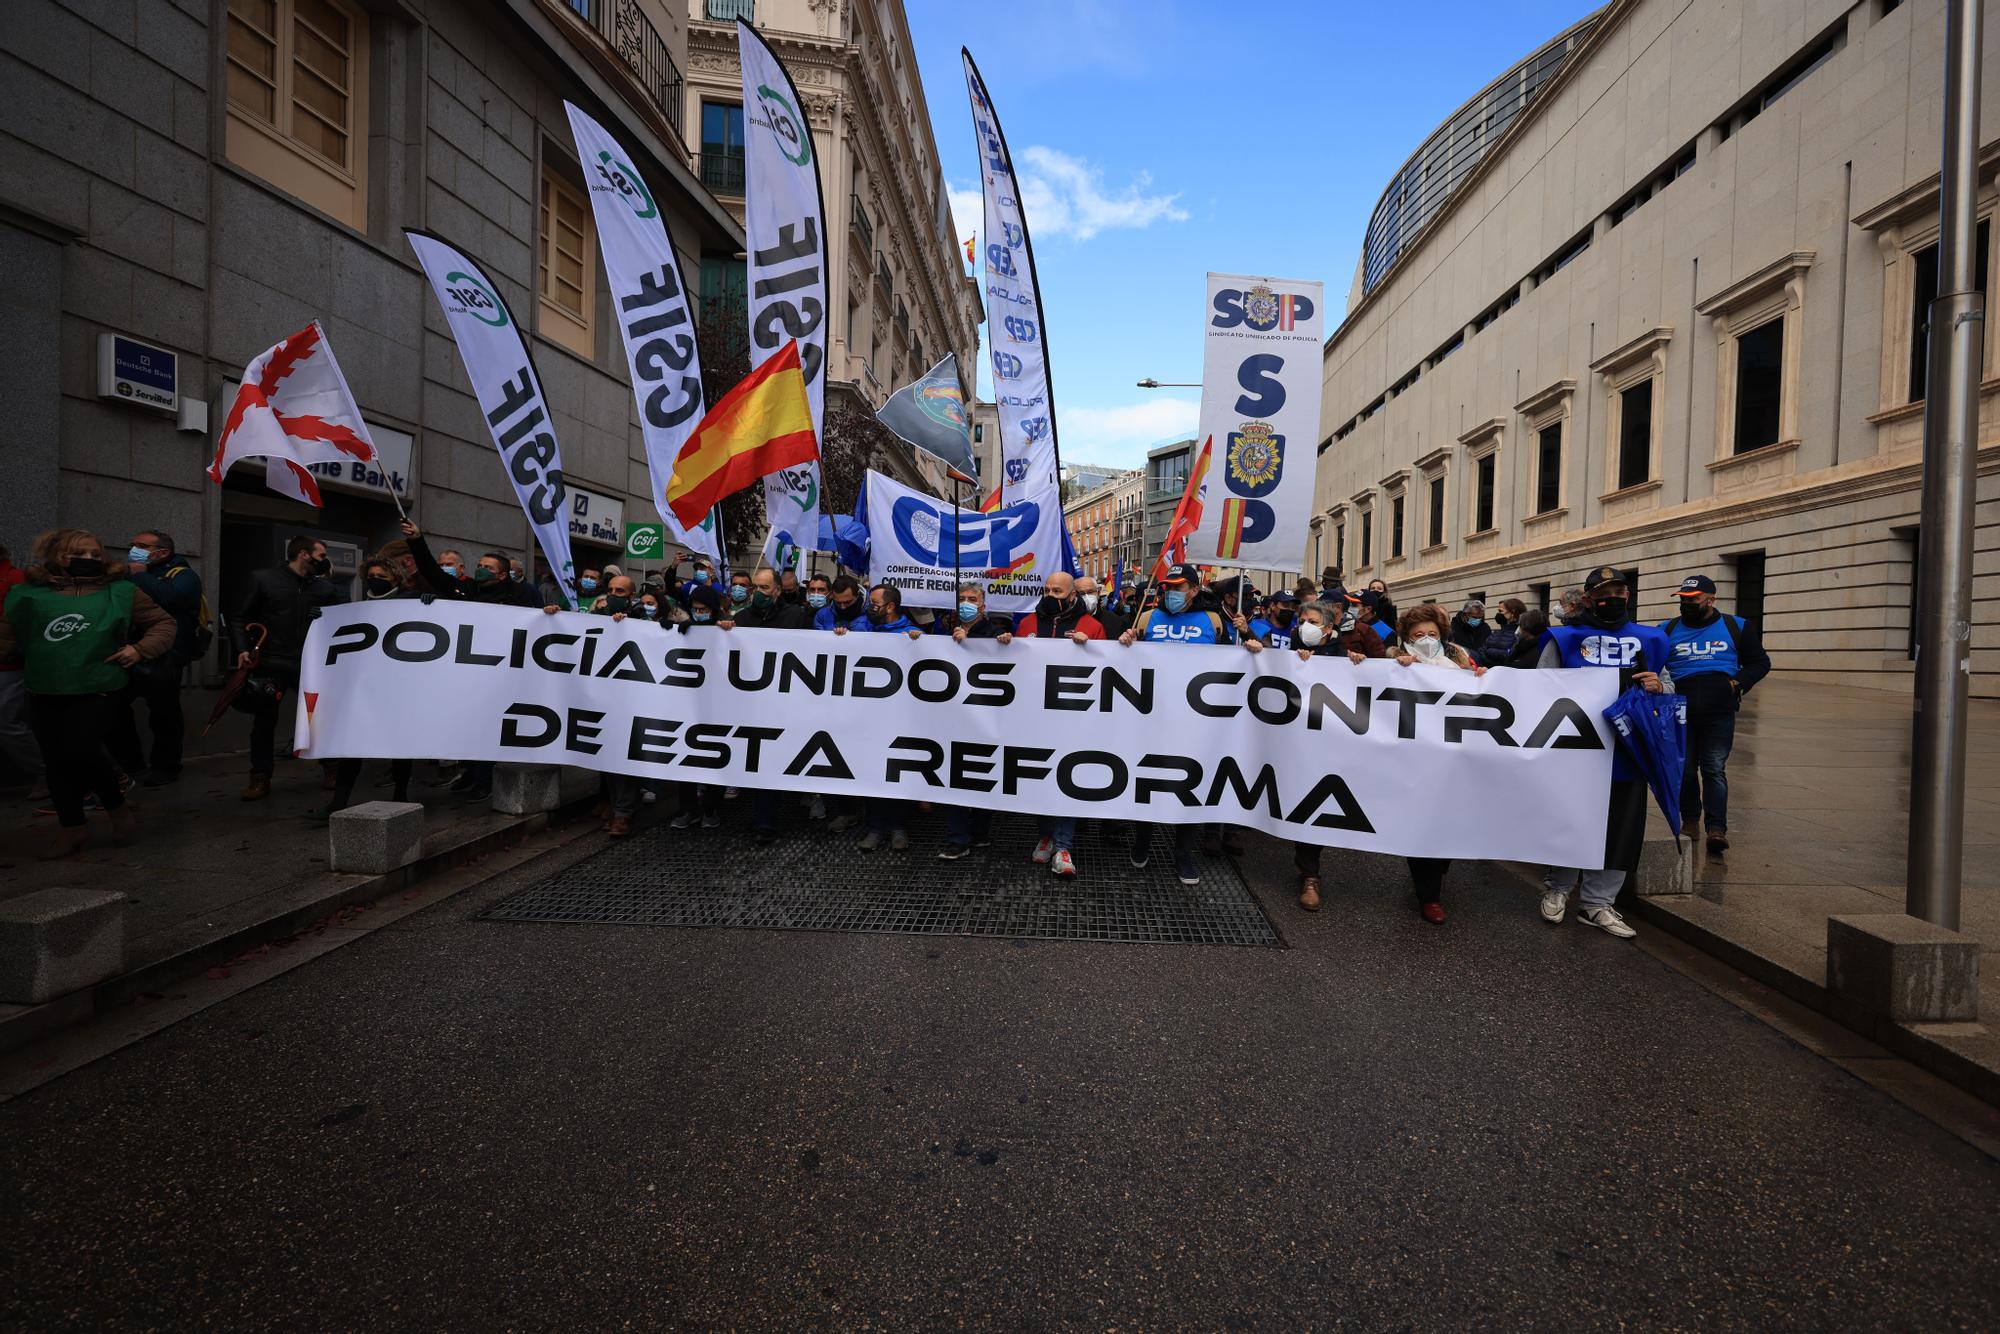 Representation of police and civil guards from Alicante in the demonstration against the 